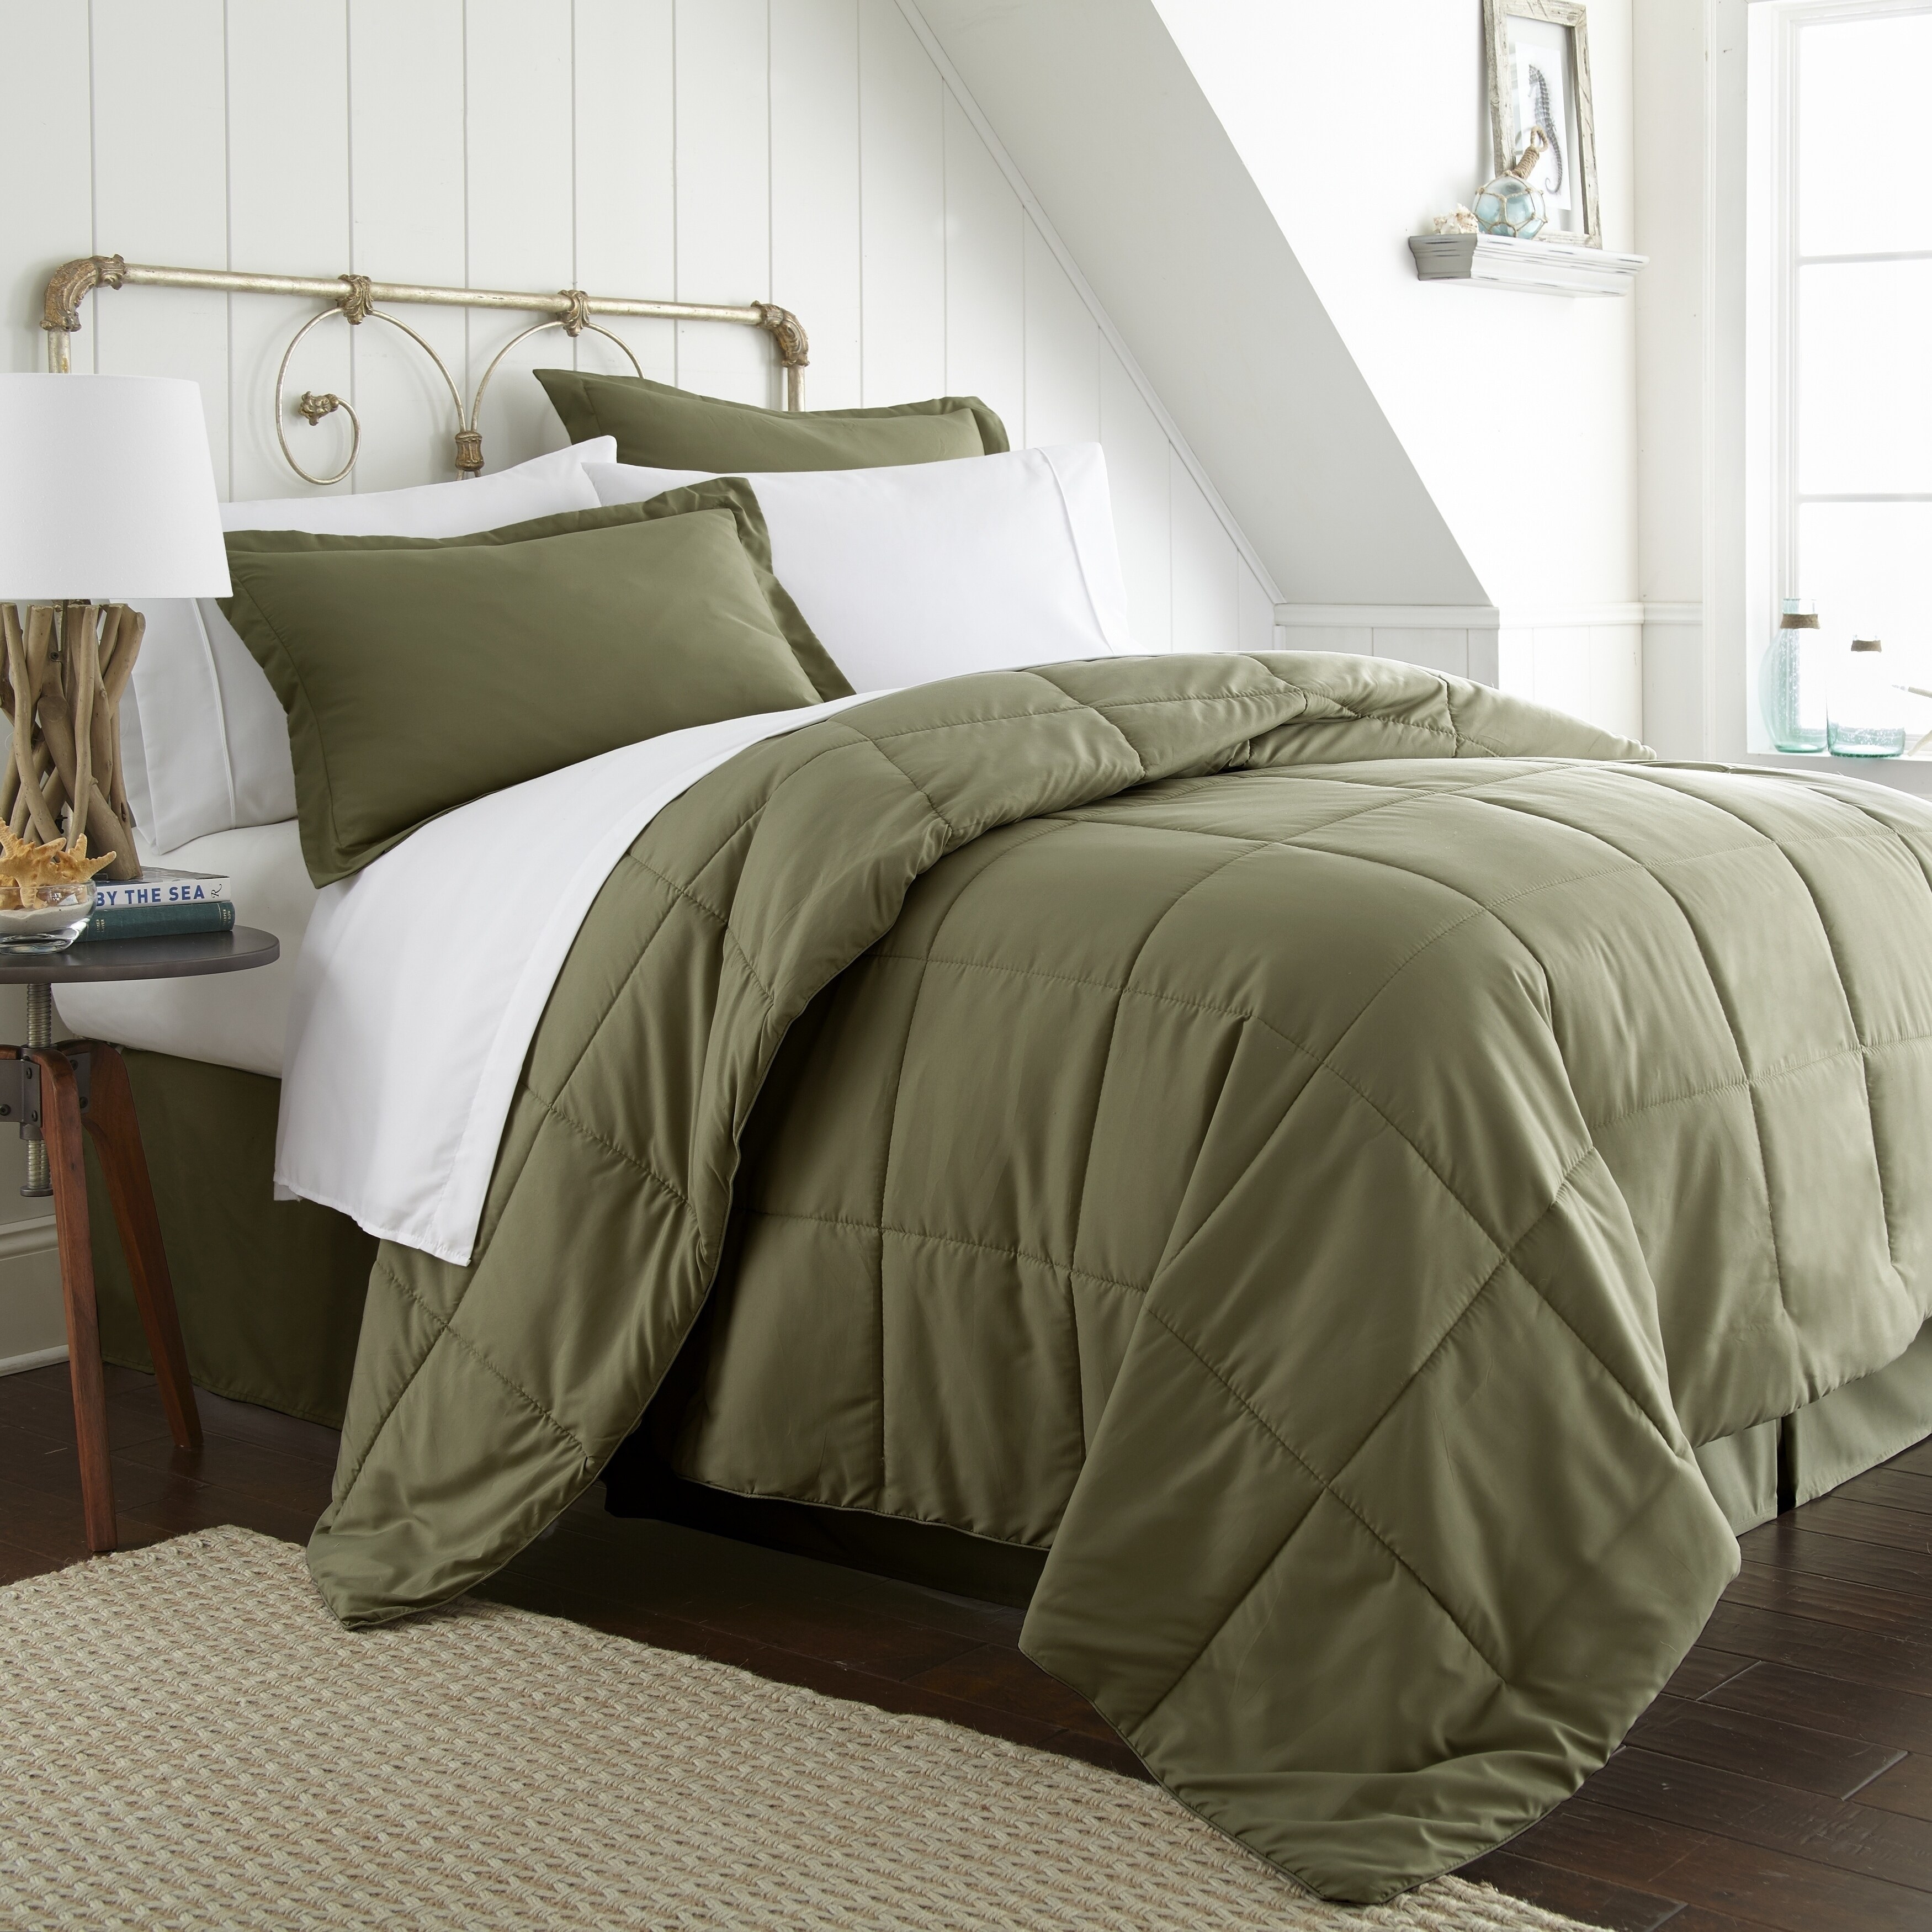 Better Homes & Gardens Sage Celine 12 Piece Pre Washed Bed in a Bag, Queen